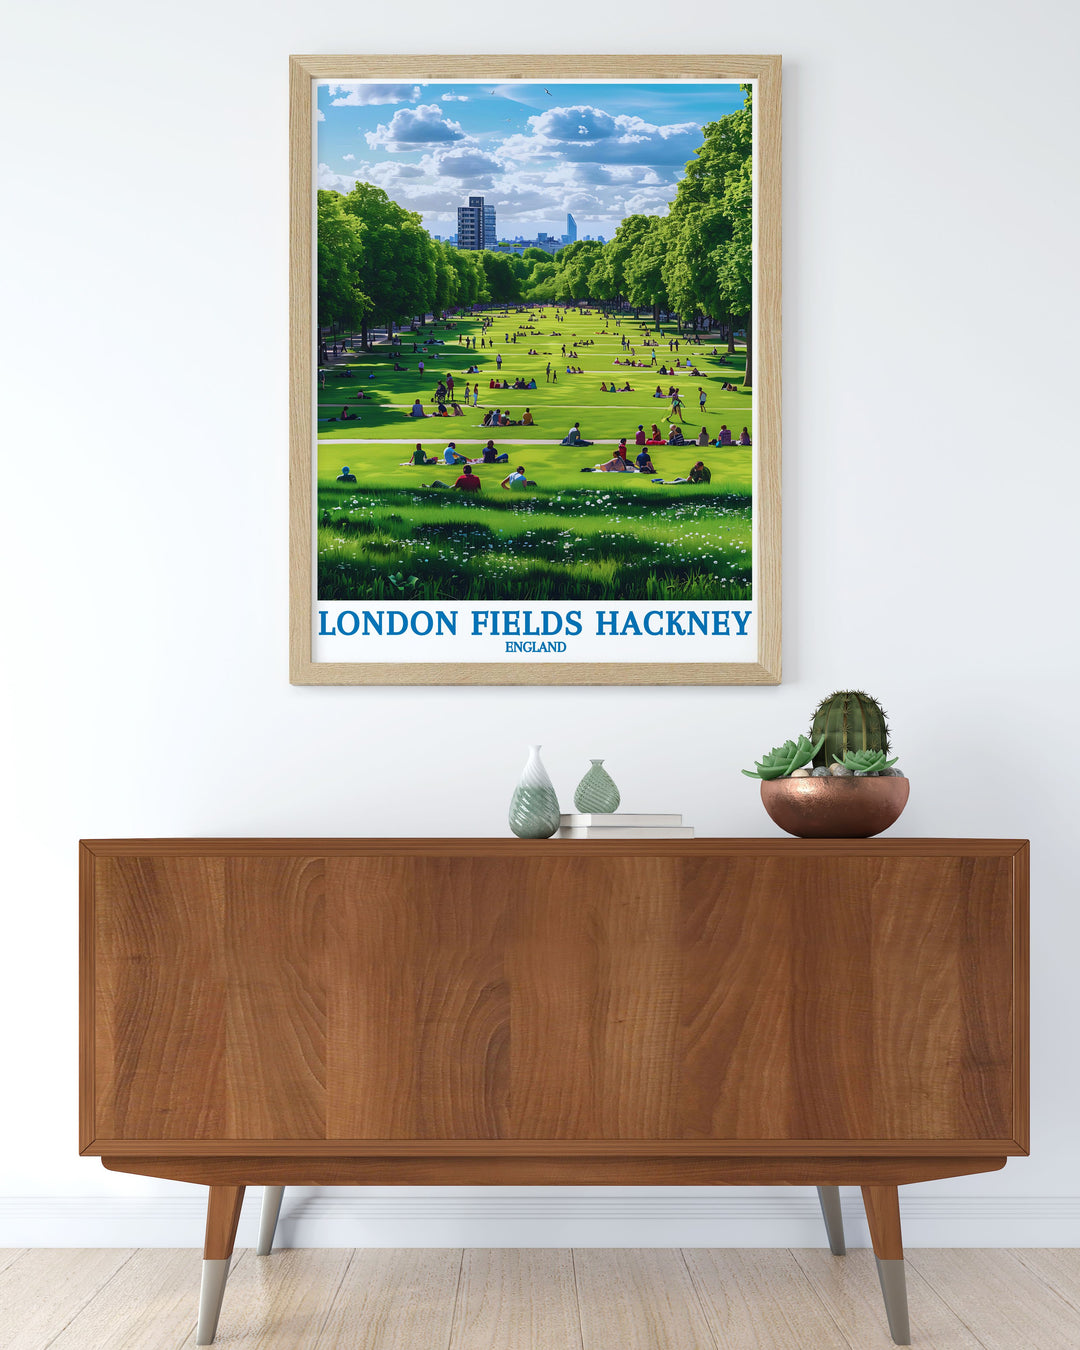 Showcasing the eclectic beauty of London Fields Park, this poster captures its vibrant community and serene landscapes, perfect for enhancing your home decor with East Londons charm.